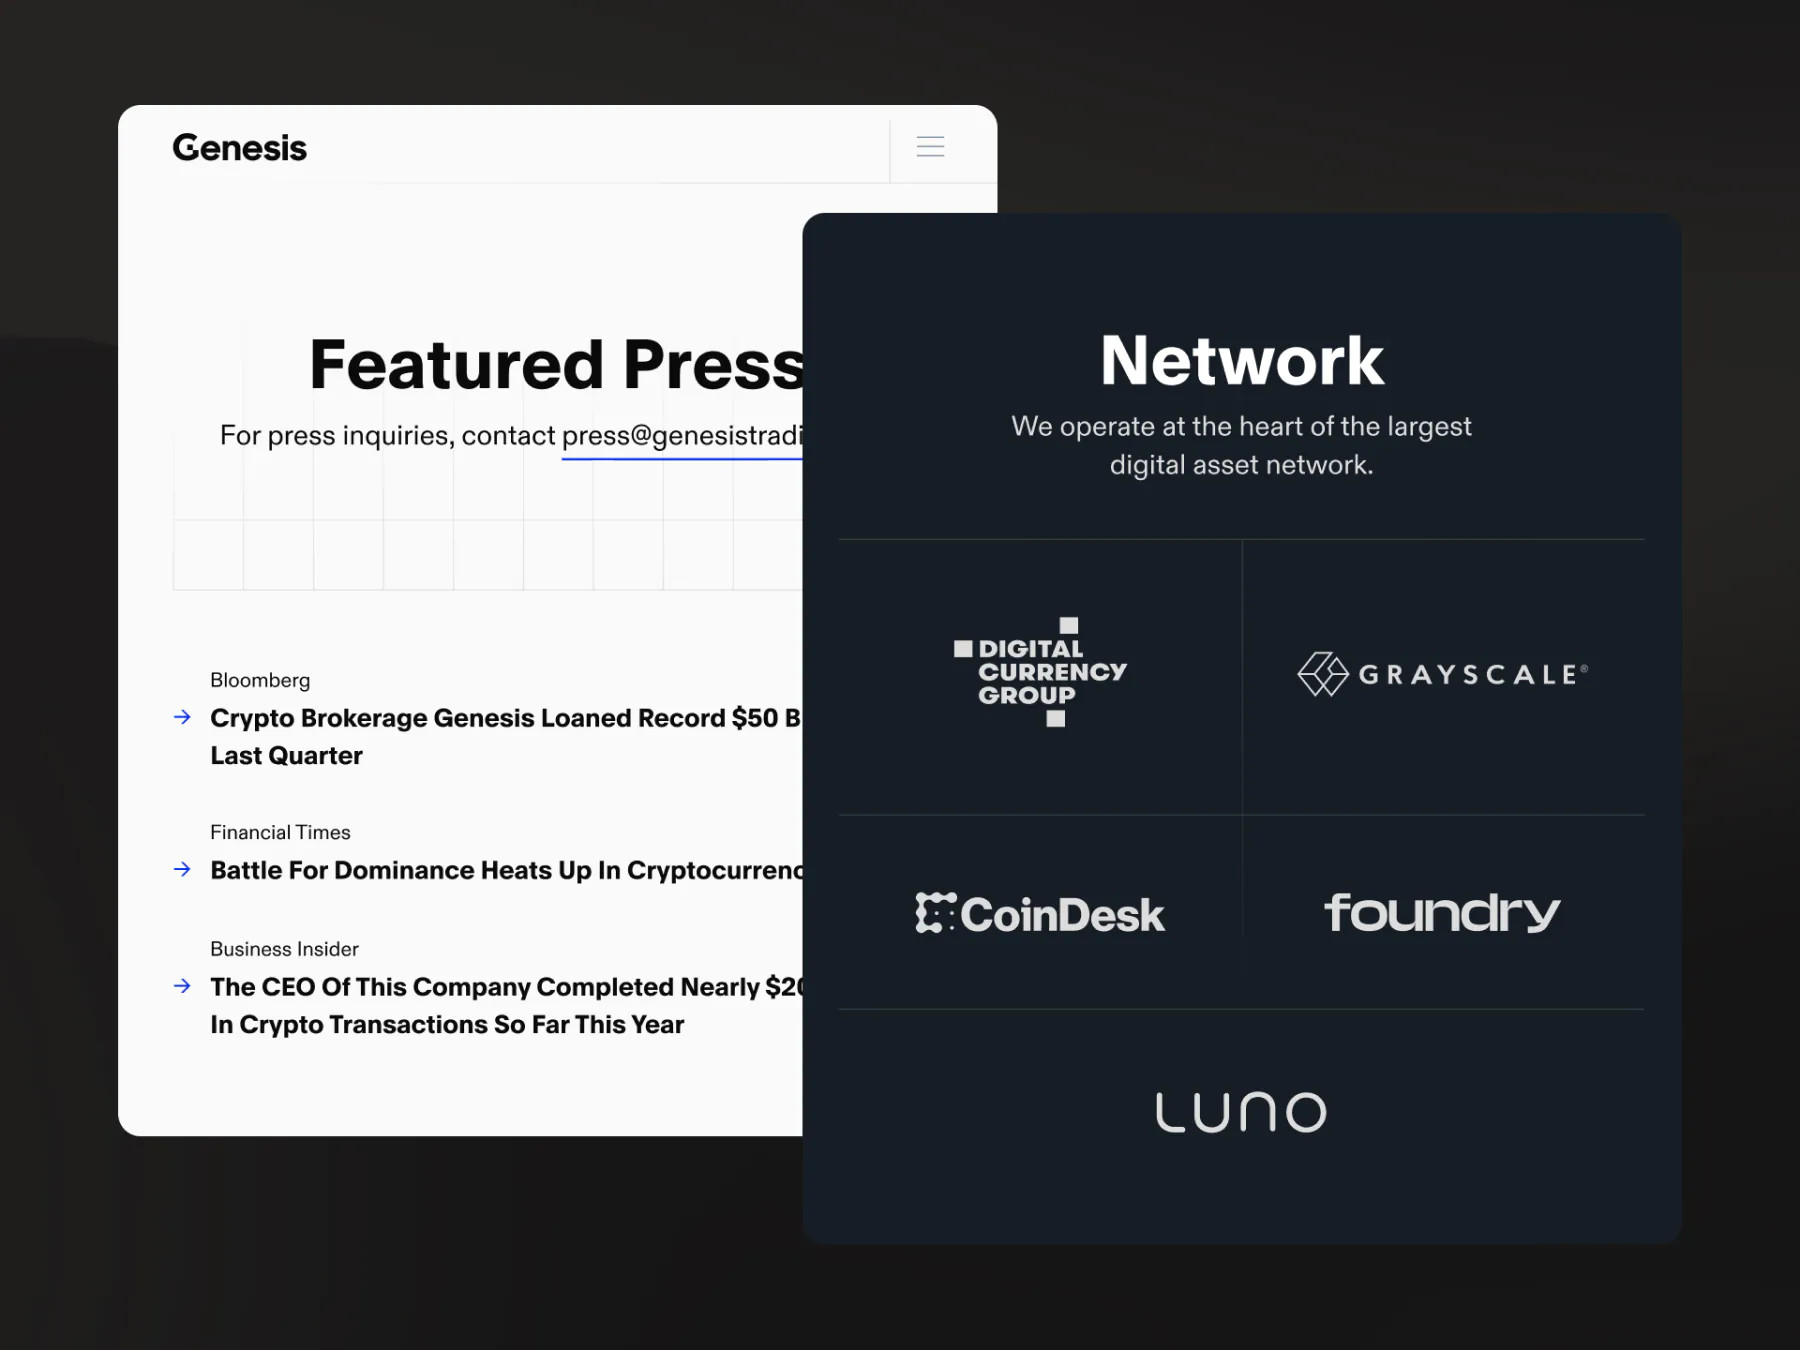 Genesis webpage sections show Featured Press articles and their Network affiliations with digital asset organizations.